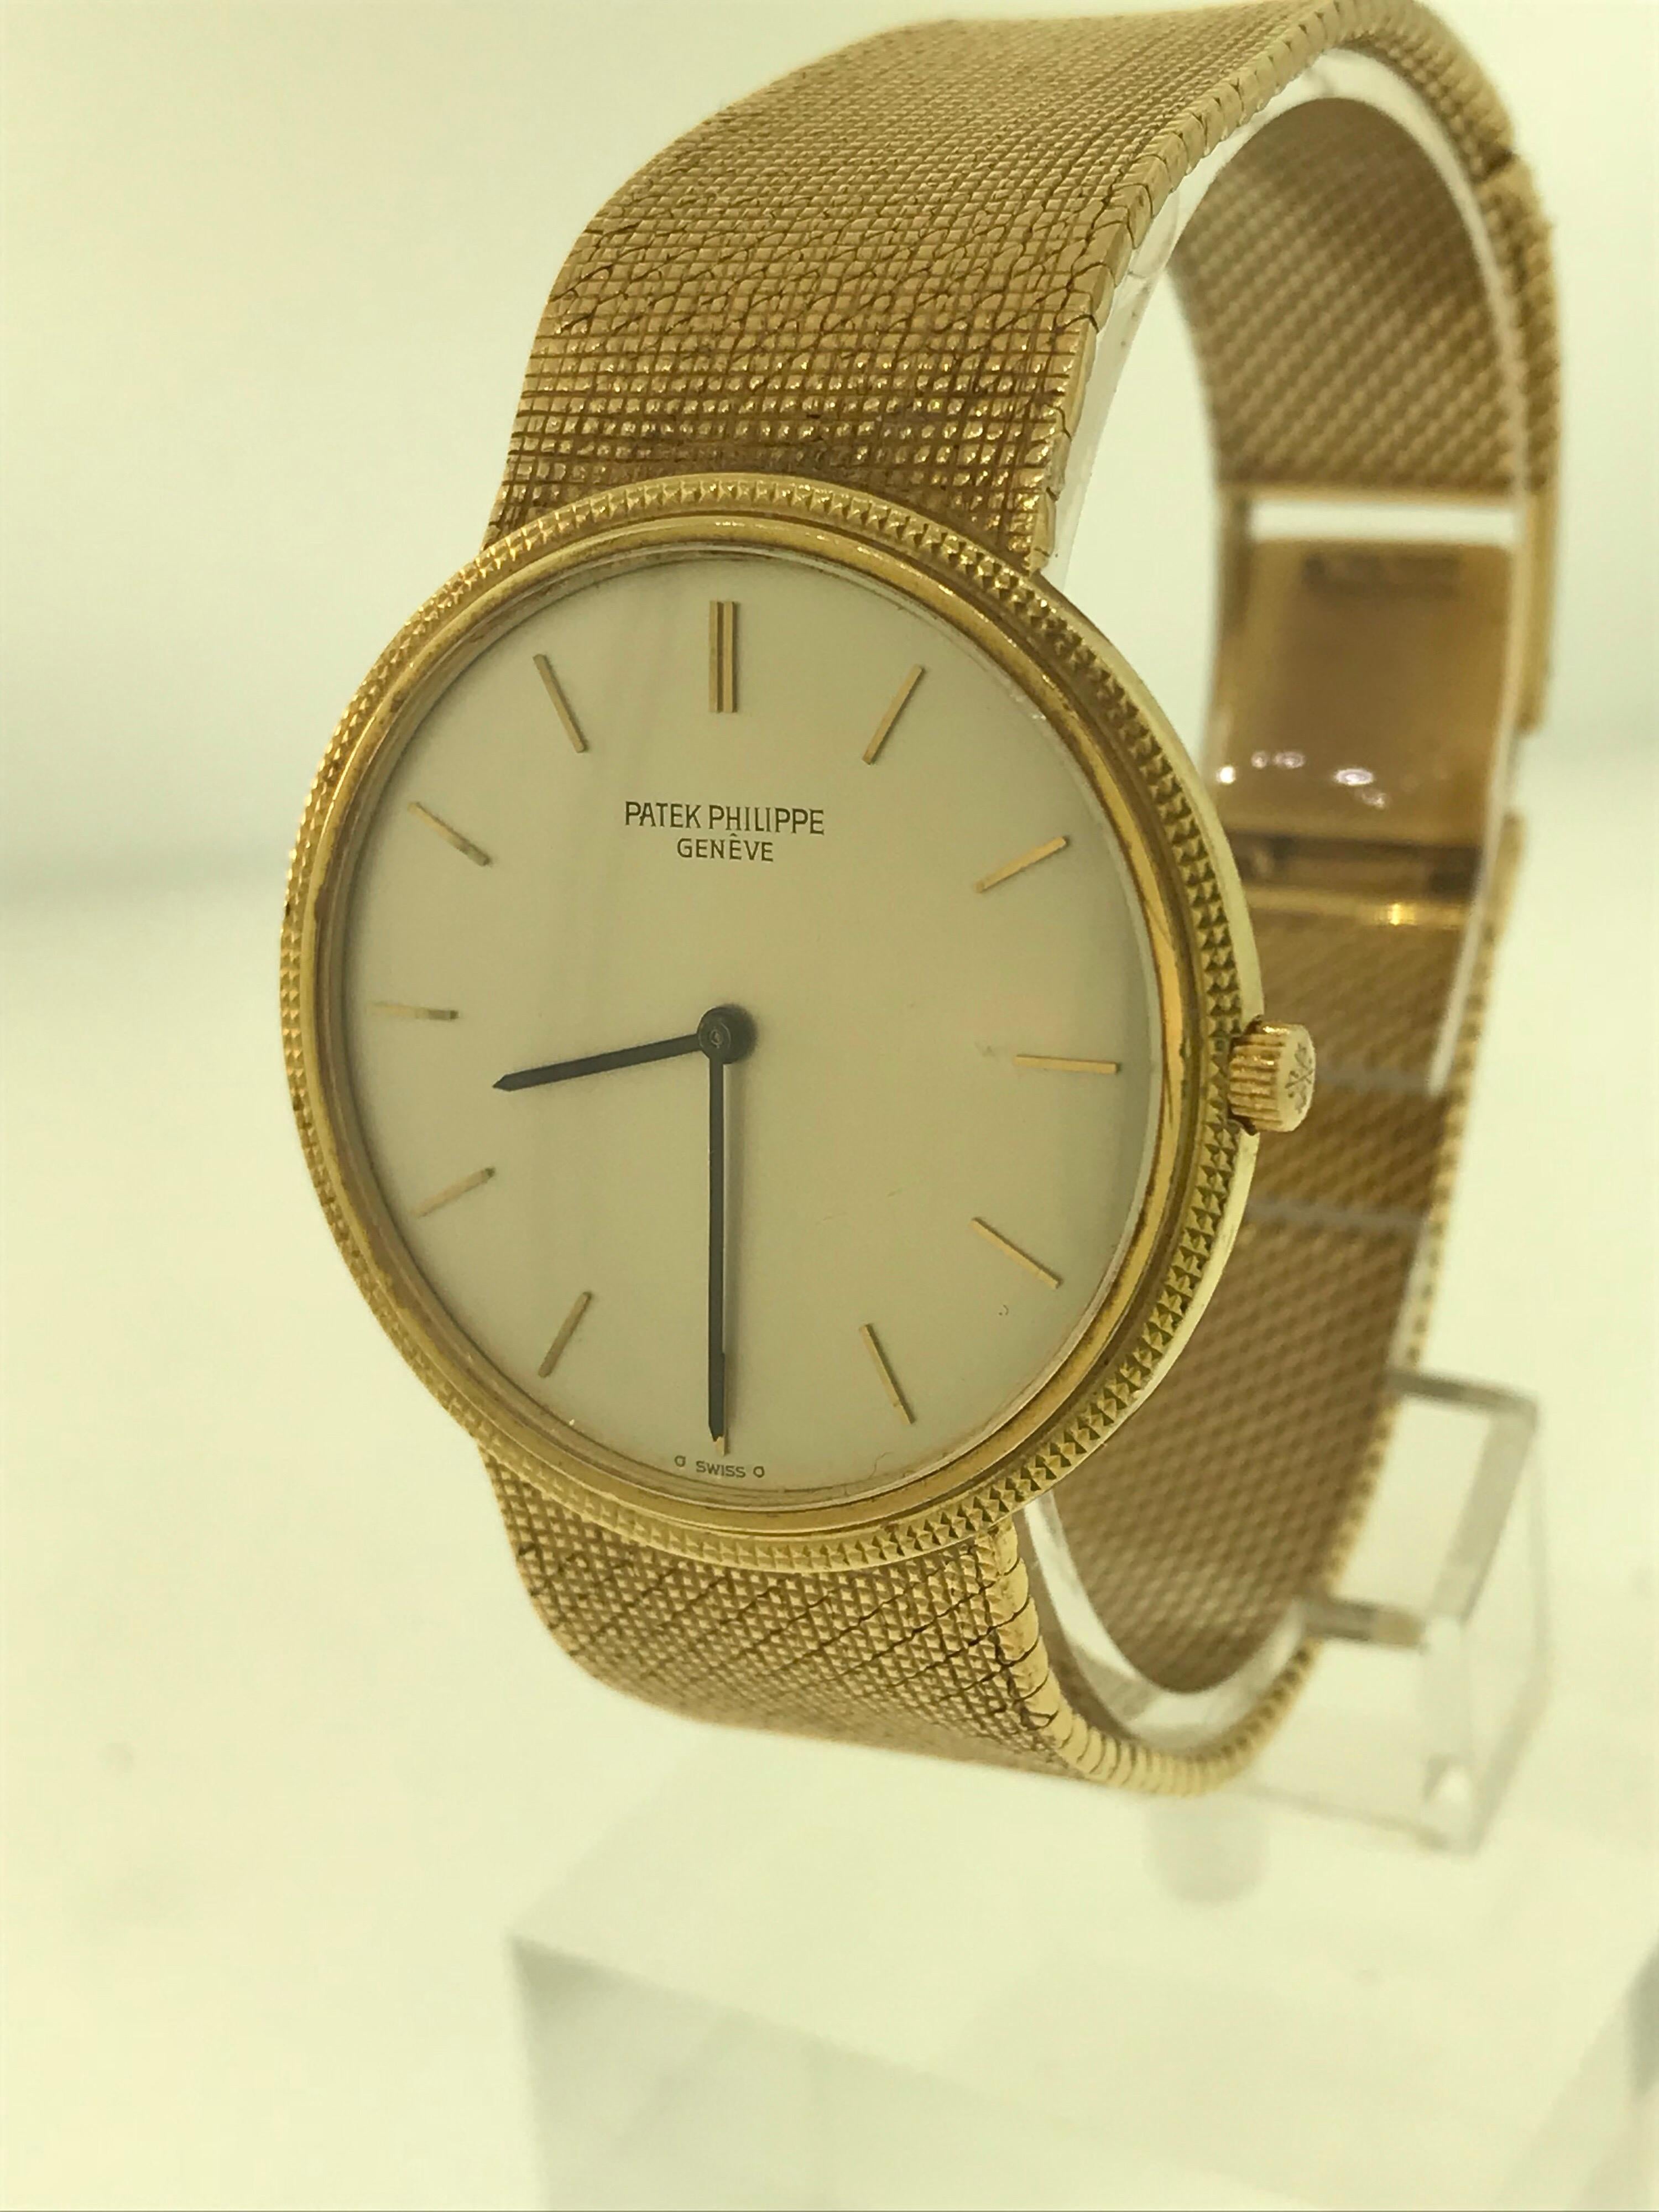 Patek Philippe Calatrava Men's Watch

Model Number 3520DJ/1

100% Authentic

Pre-owned in Fair Condition (Bracelet is not in perfect condition. Please see pictures)

Comes with a generic watch box

18 Karat Yellow Gold

Scratch Resistant Sapphire